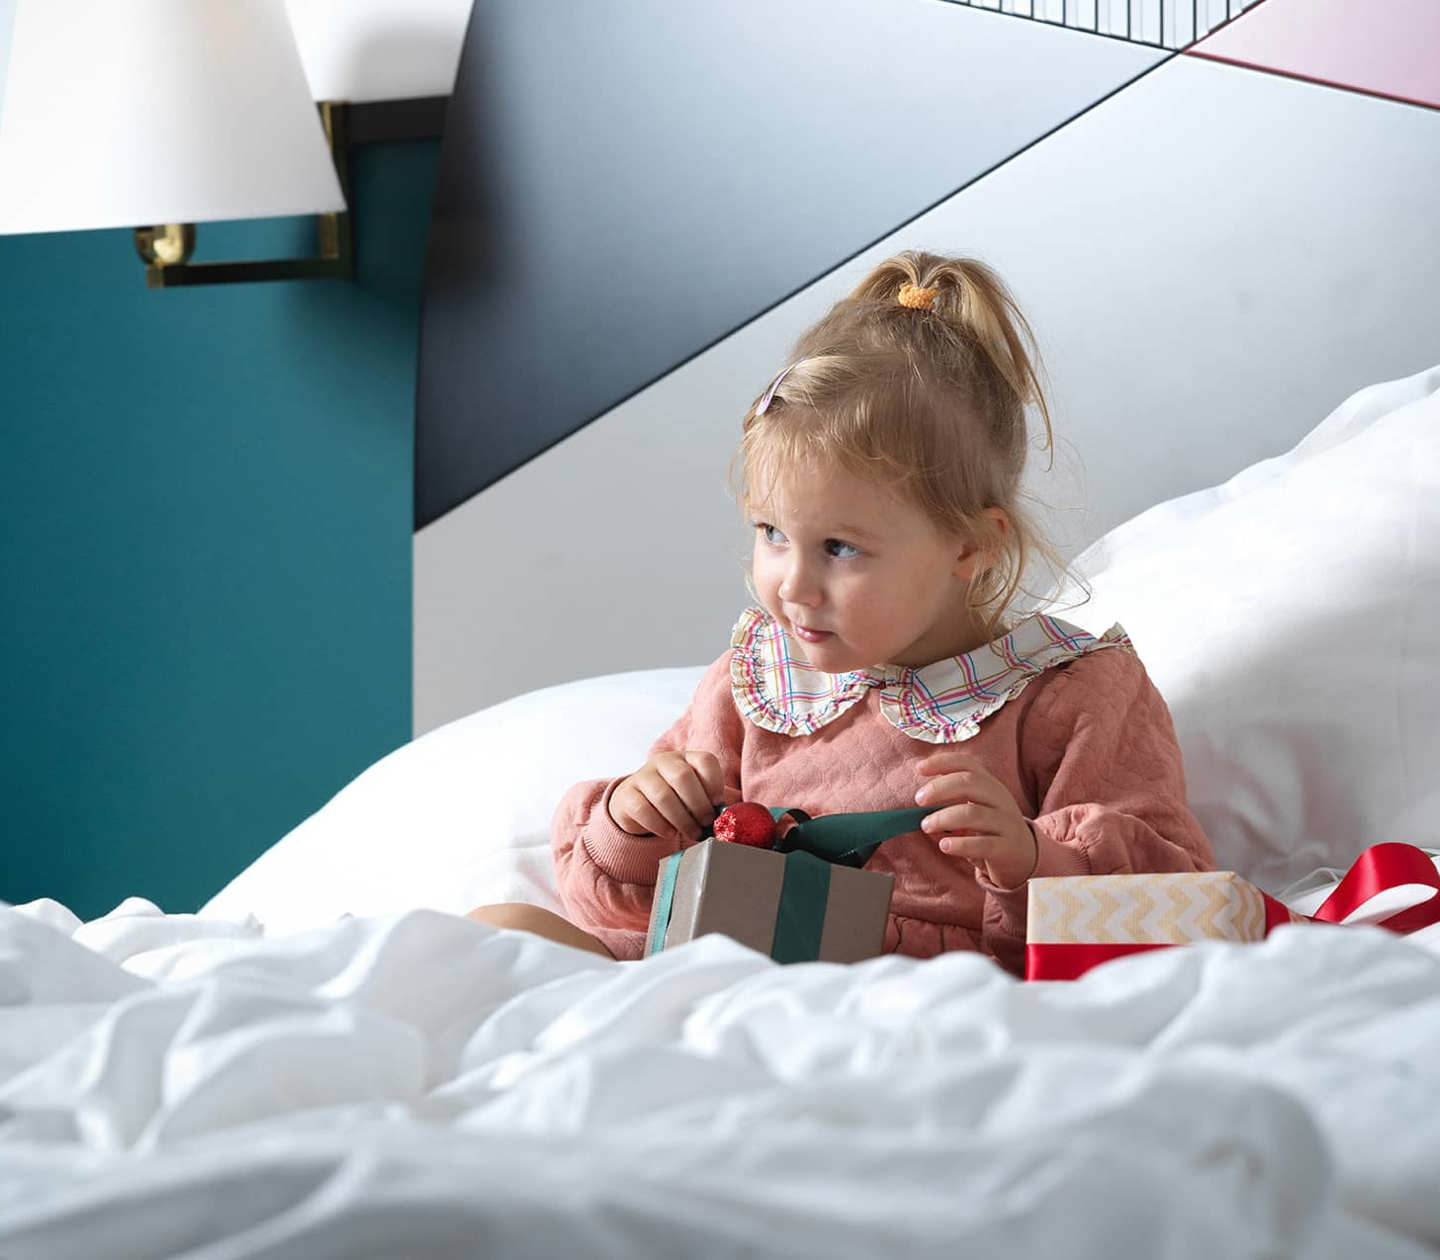 A child sitting on a hotel bed opening Christmas gifts 